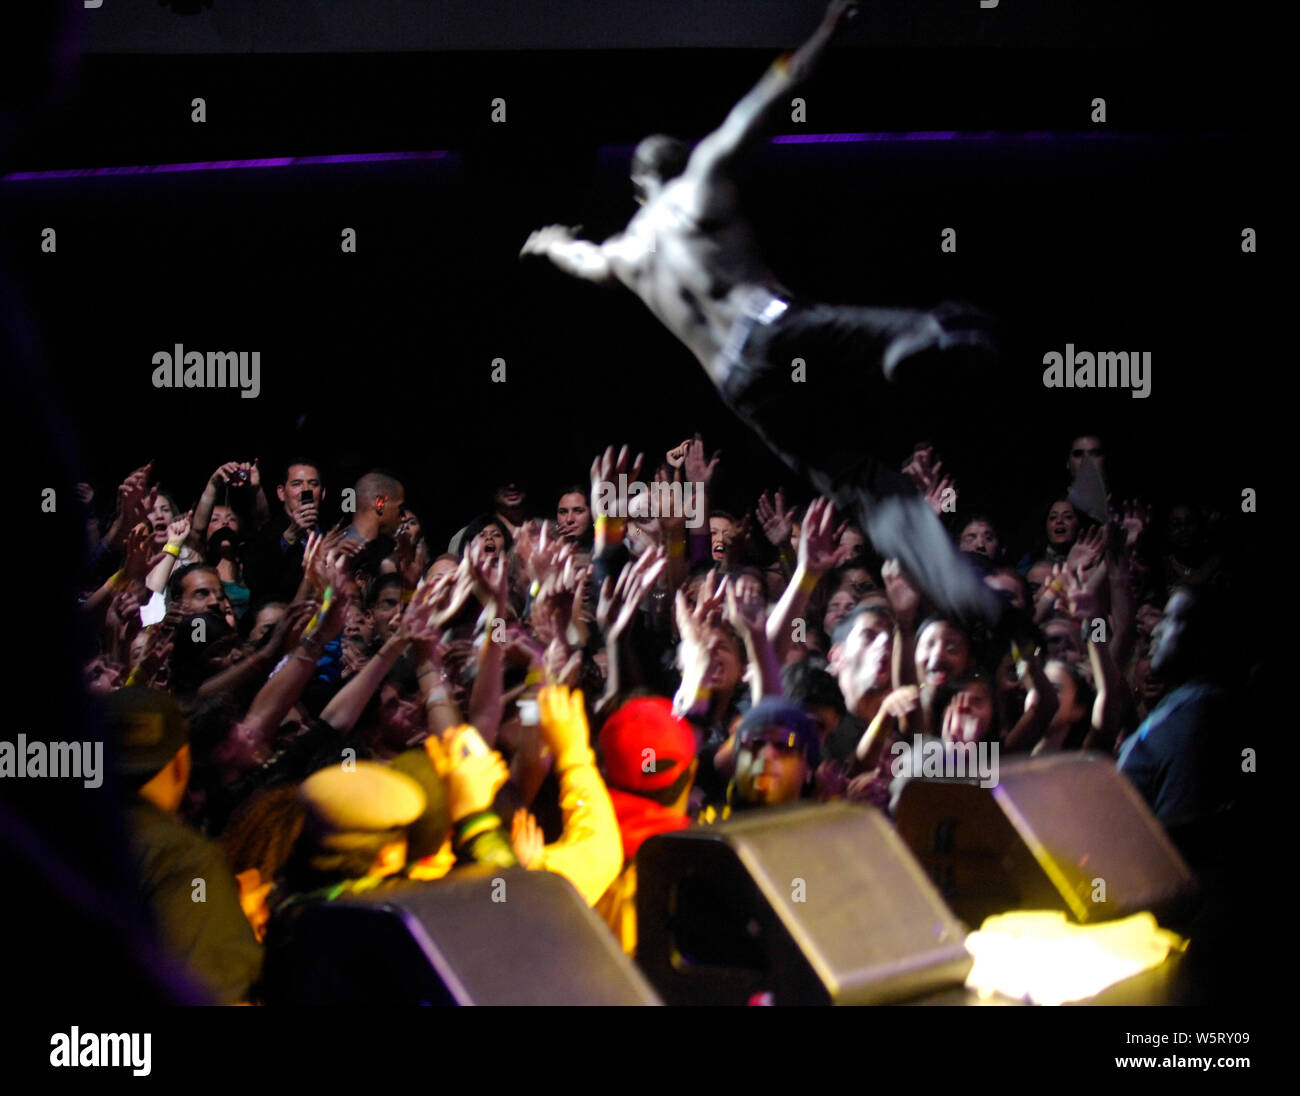 Singer Akon flys into a crowd of hands while he performs at the Nokia Theater LA Live in Los Angeles. Stock Photo